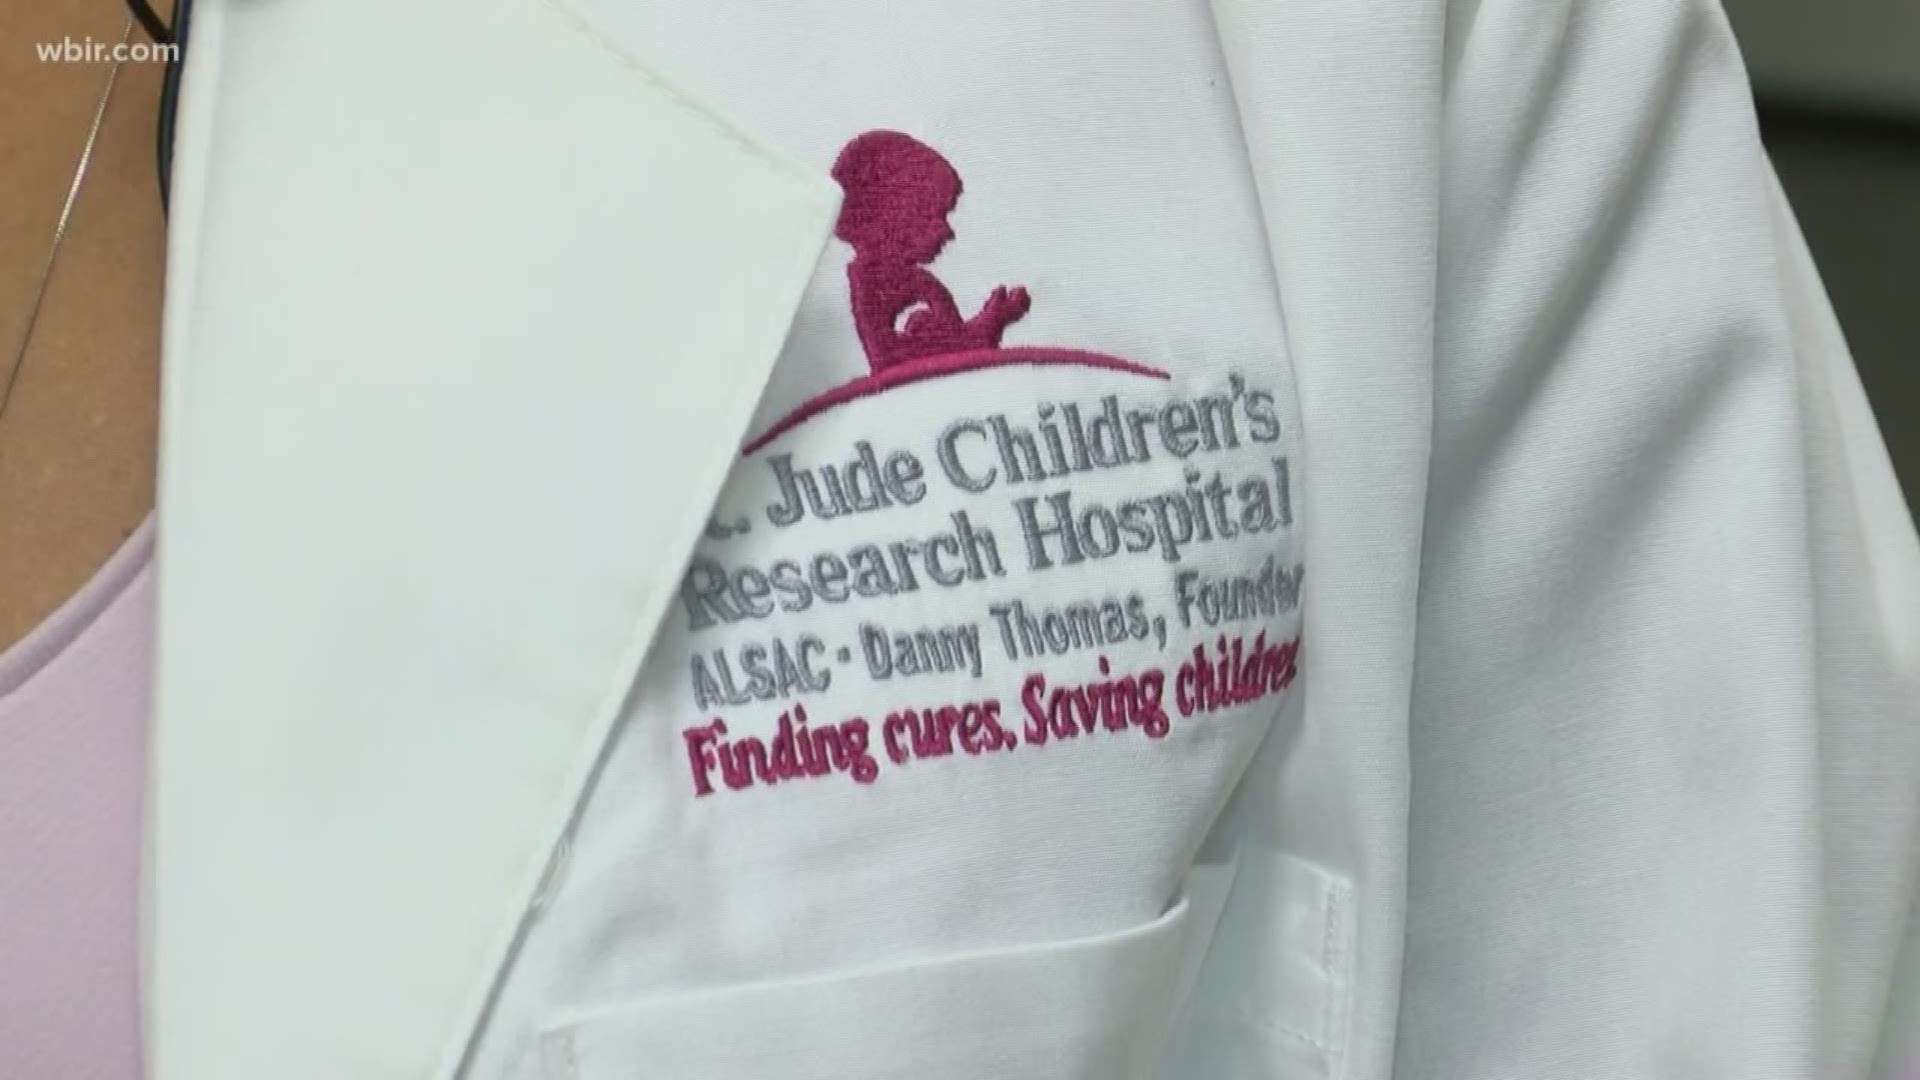 A Tennessee hospital received 34 million dollars to research the flu's impact on the immune system.
St. Jude Children's Research Hospital in Memphis says the grant comes from the National Institutes of Allergy and Infectious Diseases.